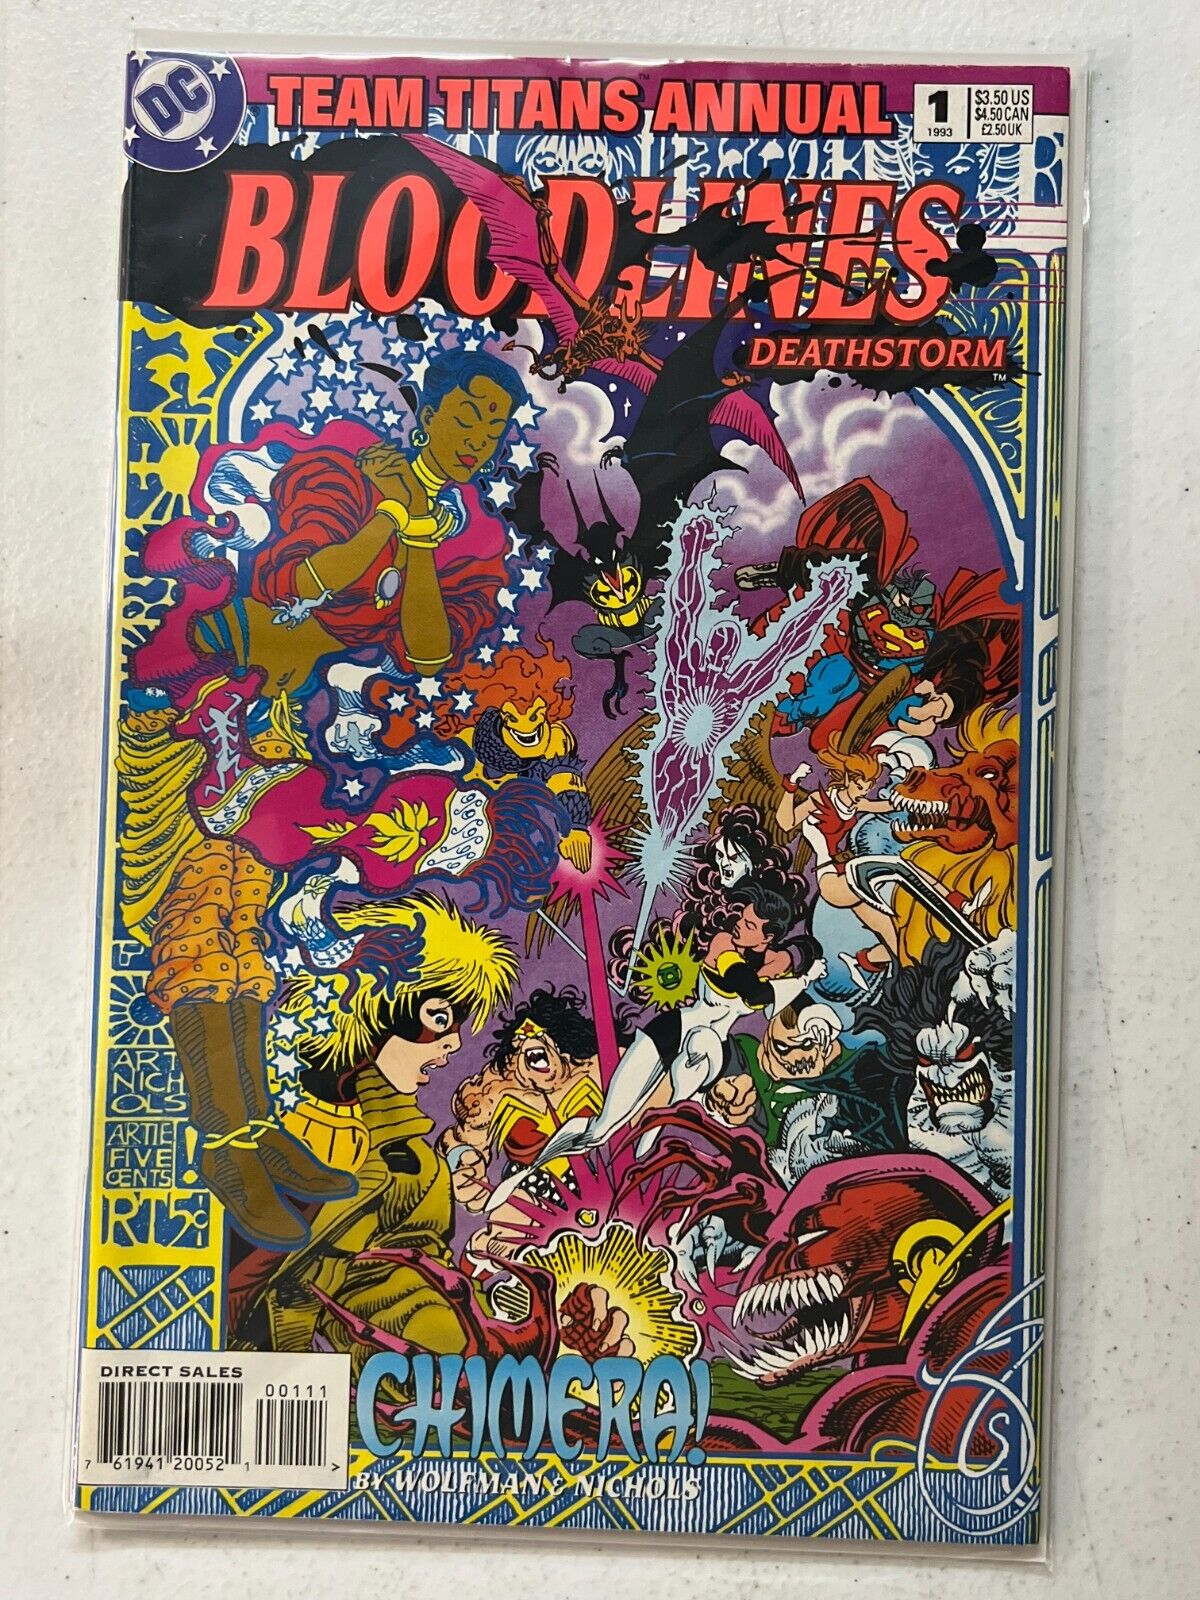 TEAM TITANS ANNUAL #1 BLOODLINES TIE-IN (1993) | Combined Shipping B&B